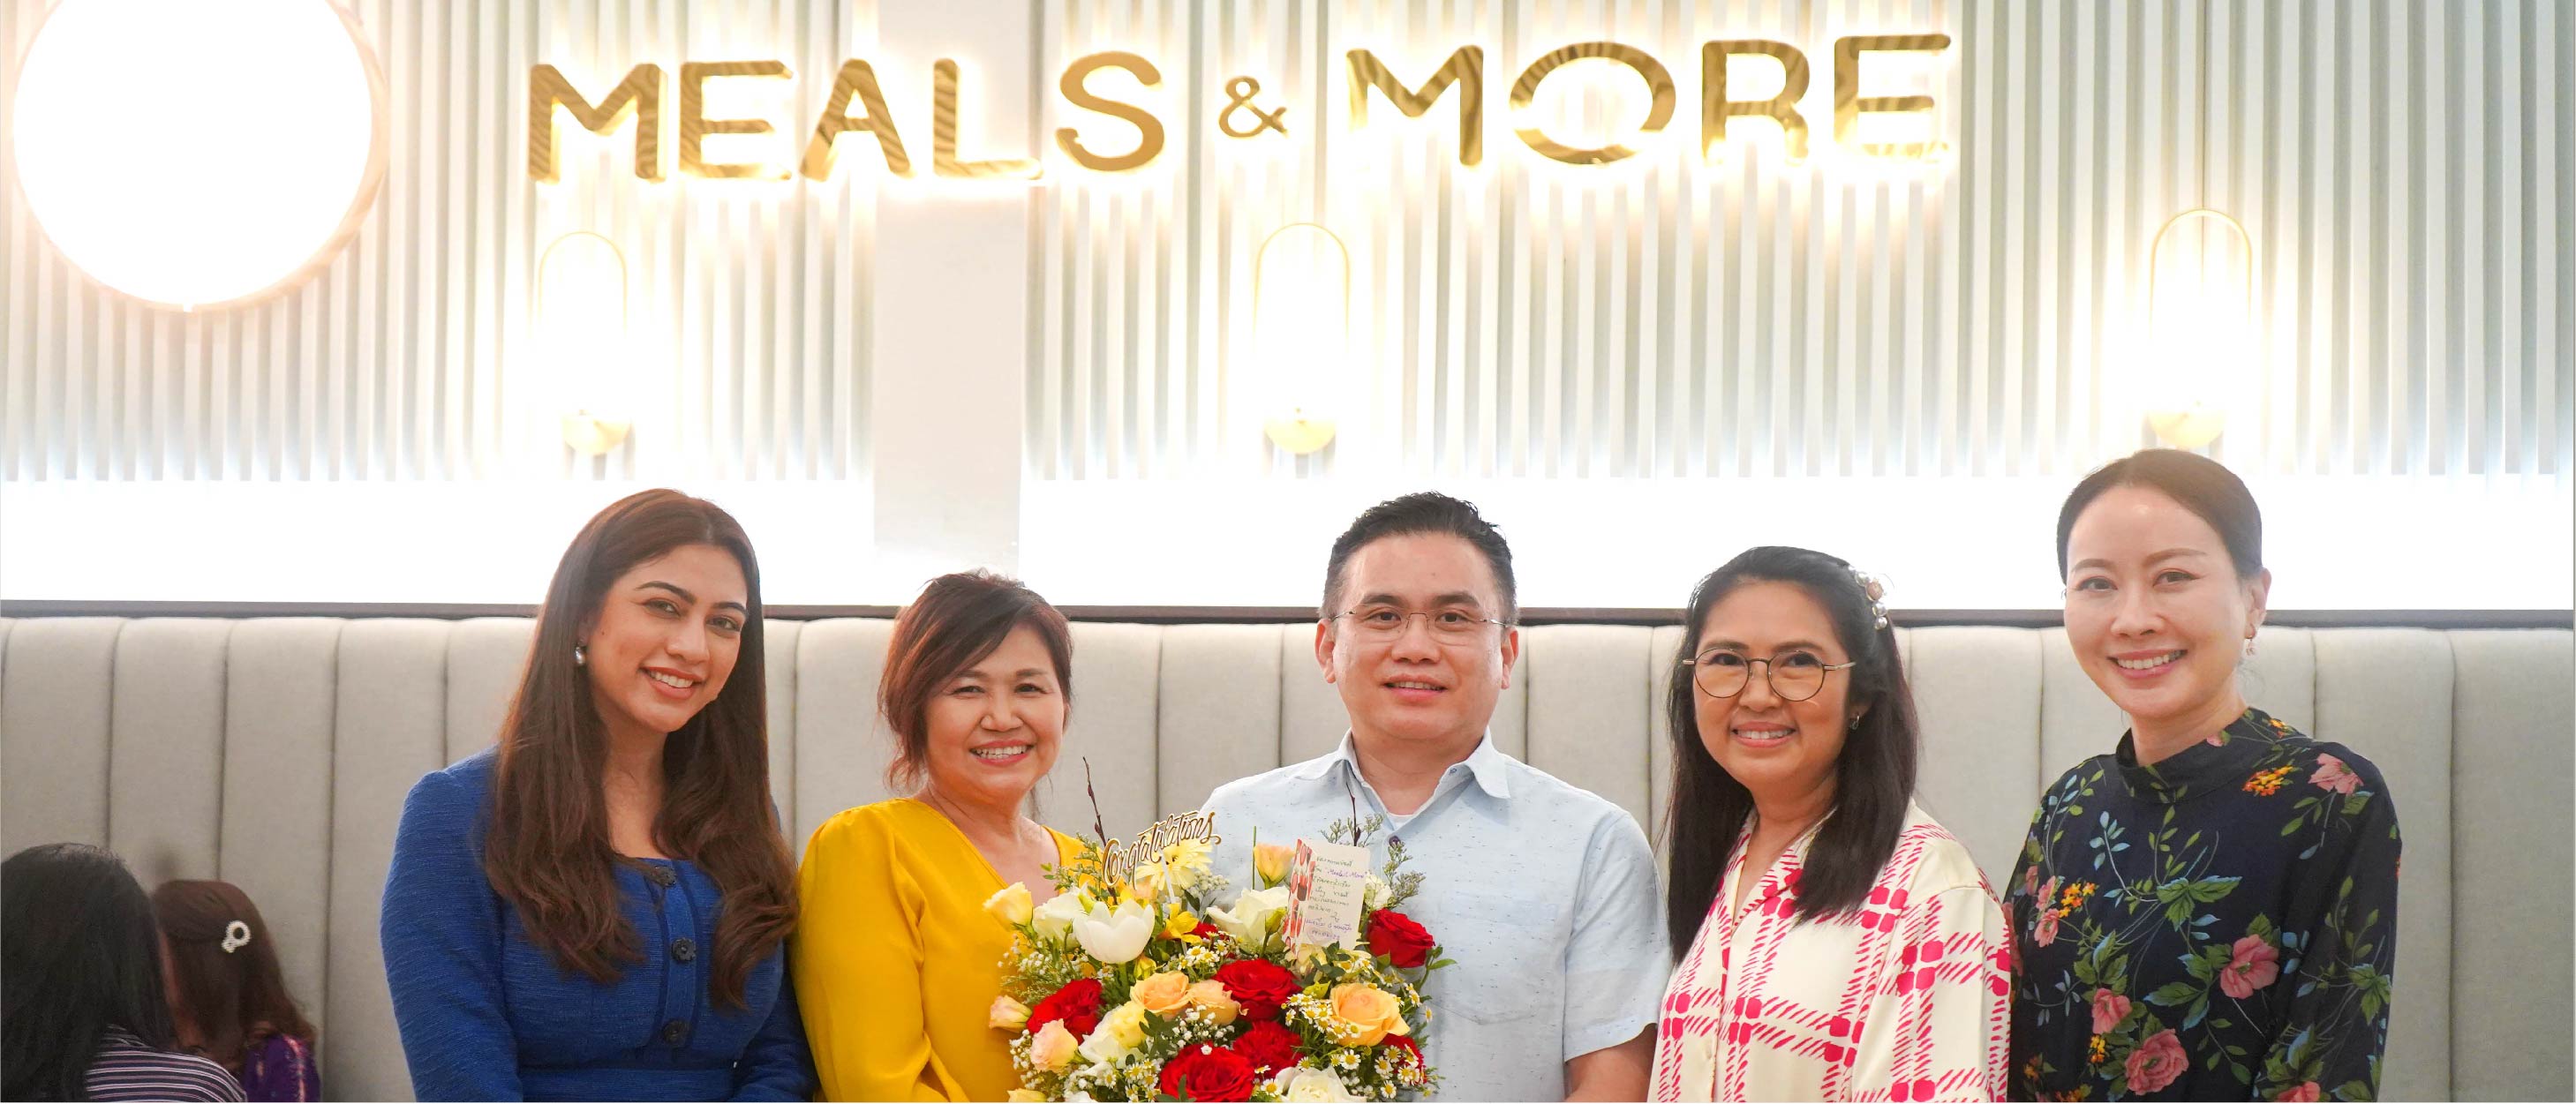 Launched  "MEALS AND MORE" Restaurant, more than just "FOOD FOR YOU".